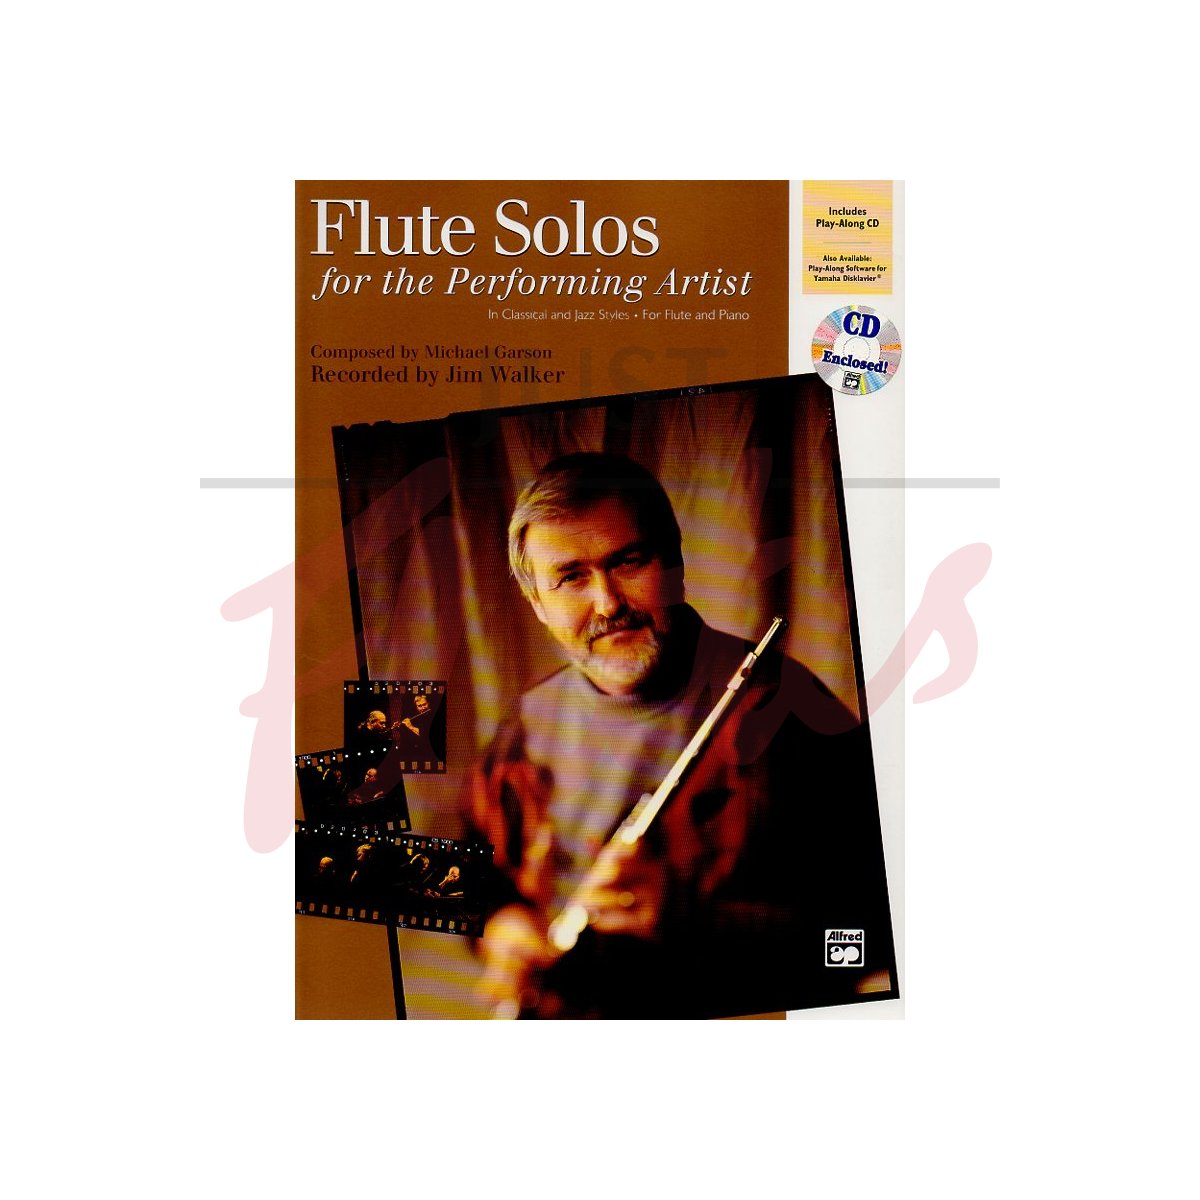 Flute Solos for the Performing Artist